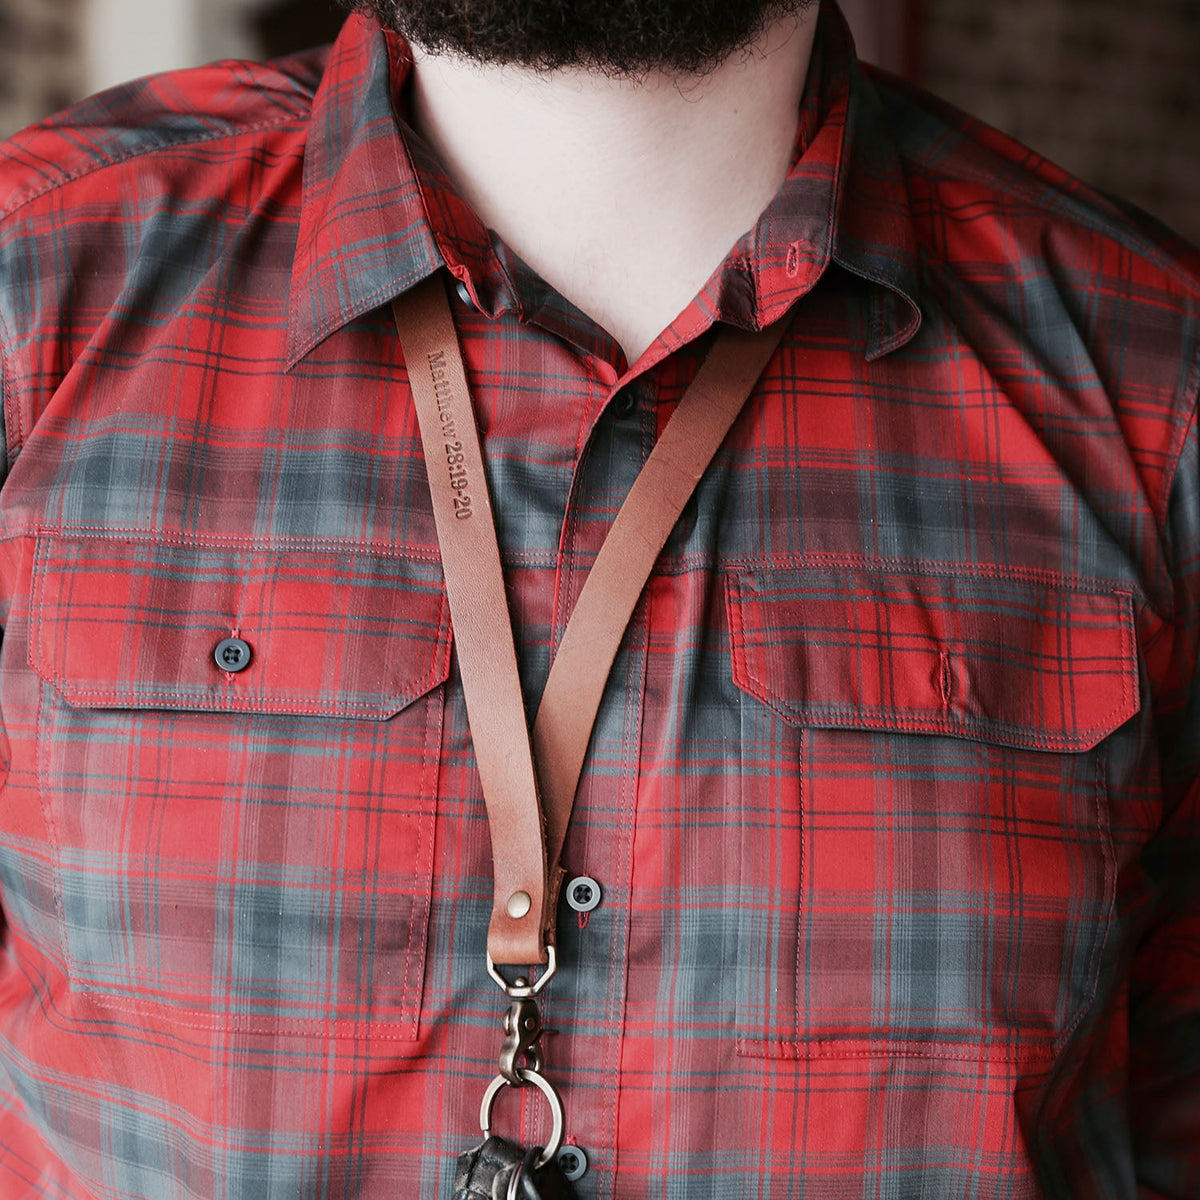 Your Logo + Our Leather - The Producer – Personalized Fine Leather Lanyard with Swivel Clip - Custom Logo and Corporate Gifting